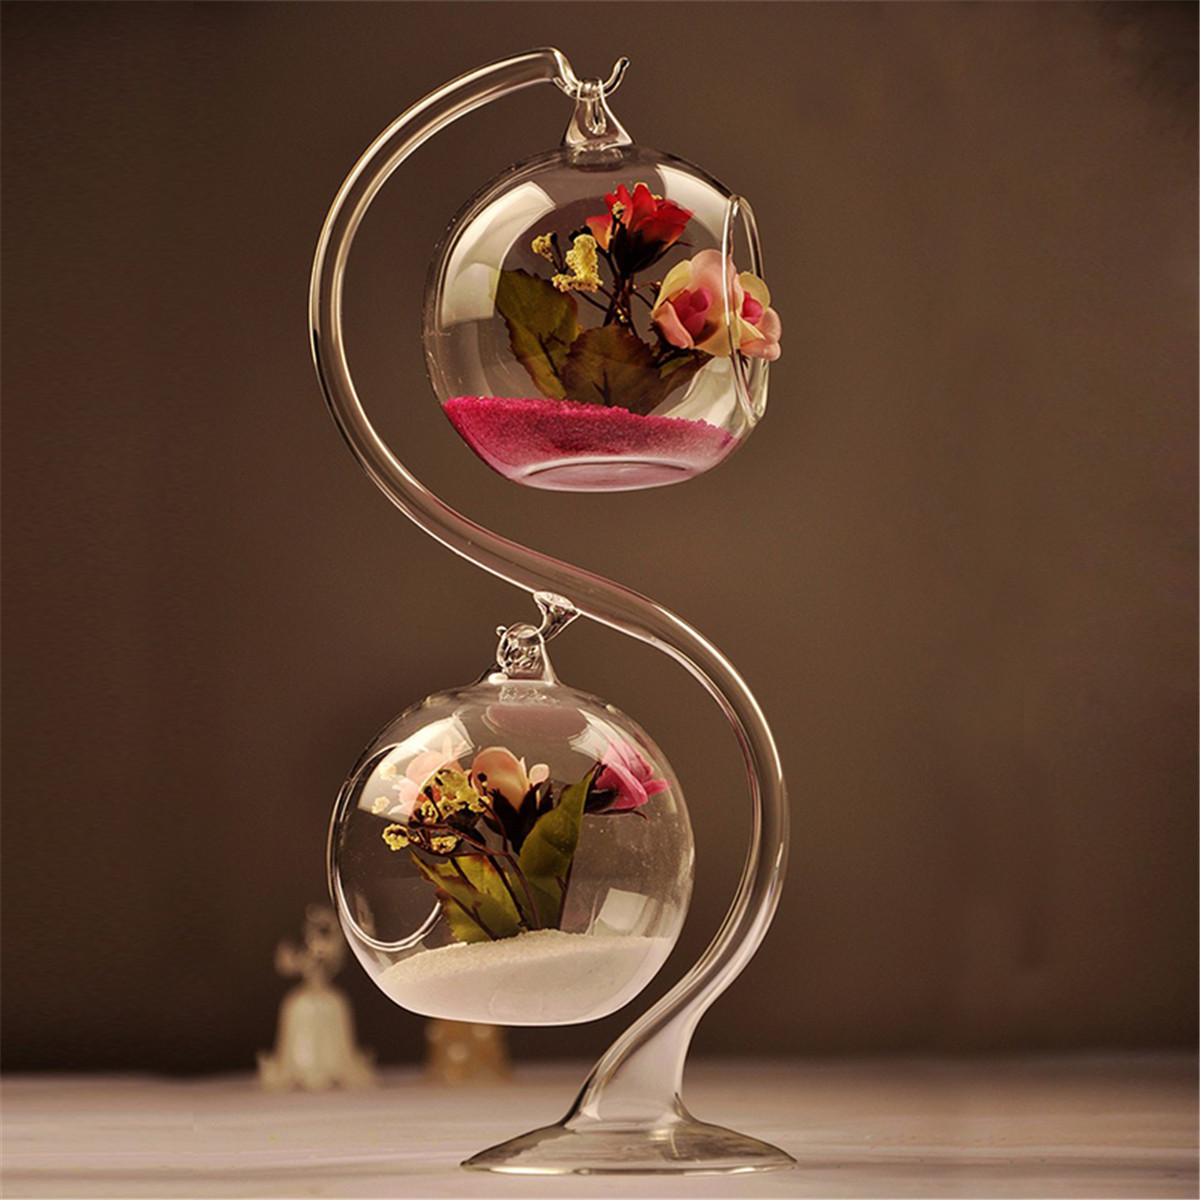 

Hanging Glass Iron Ball Flower Vase Micro Landscape Terrarium with S Support Stand